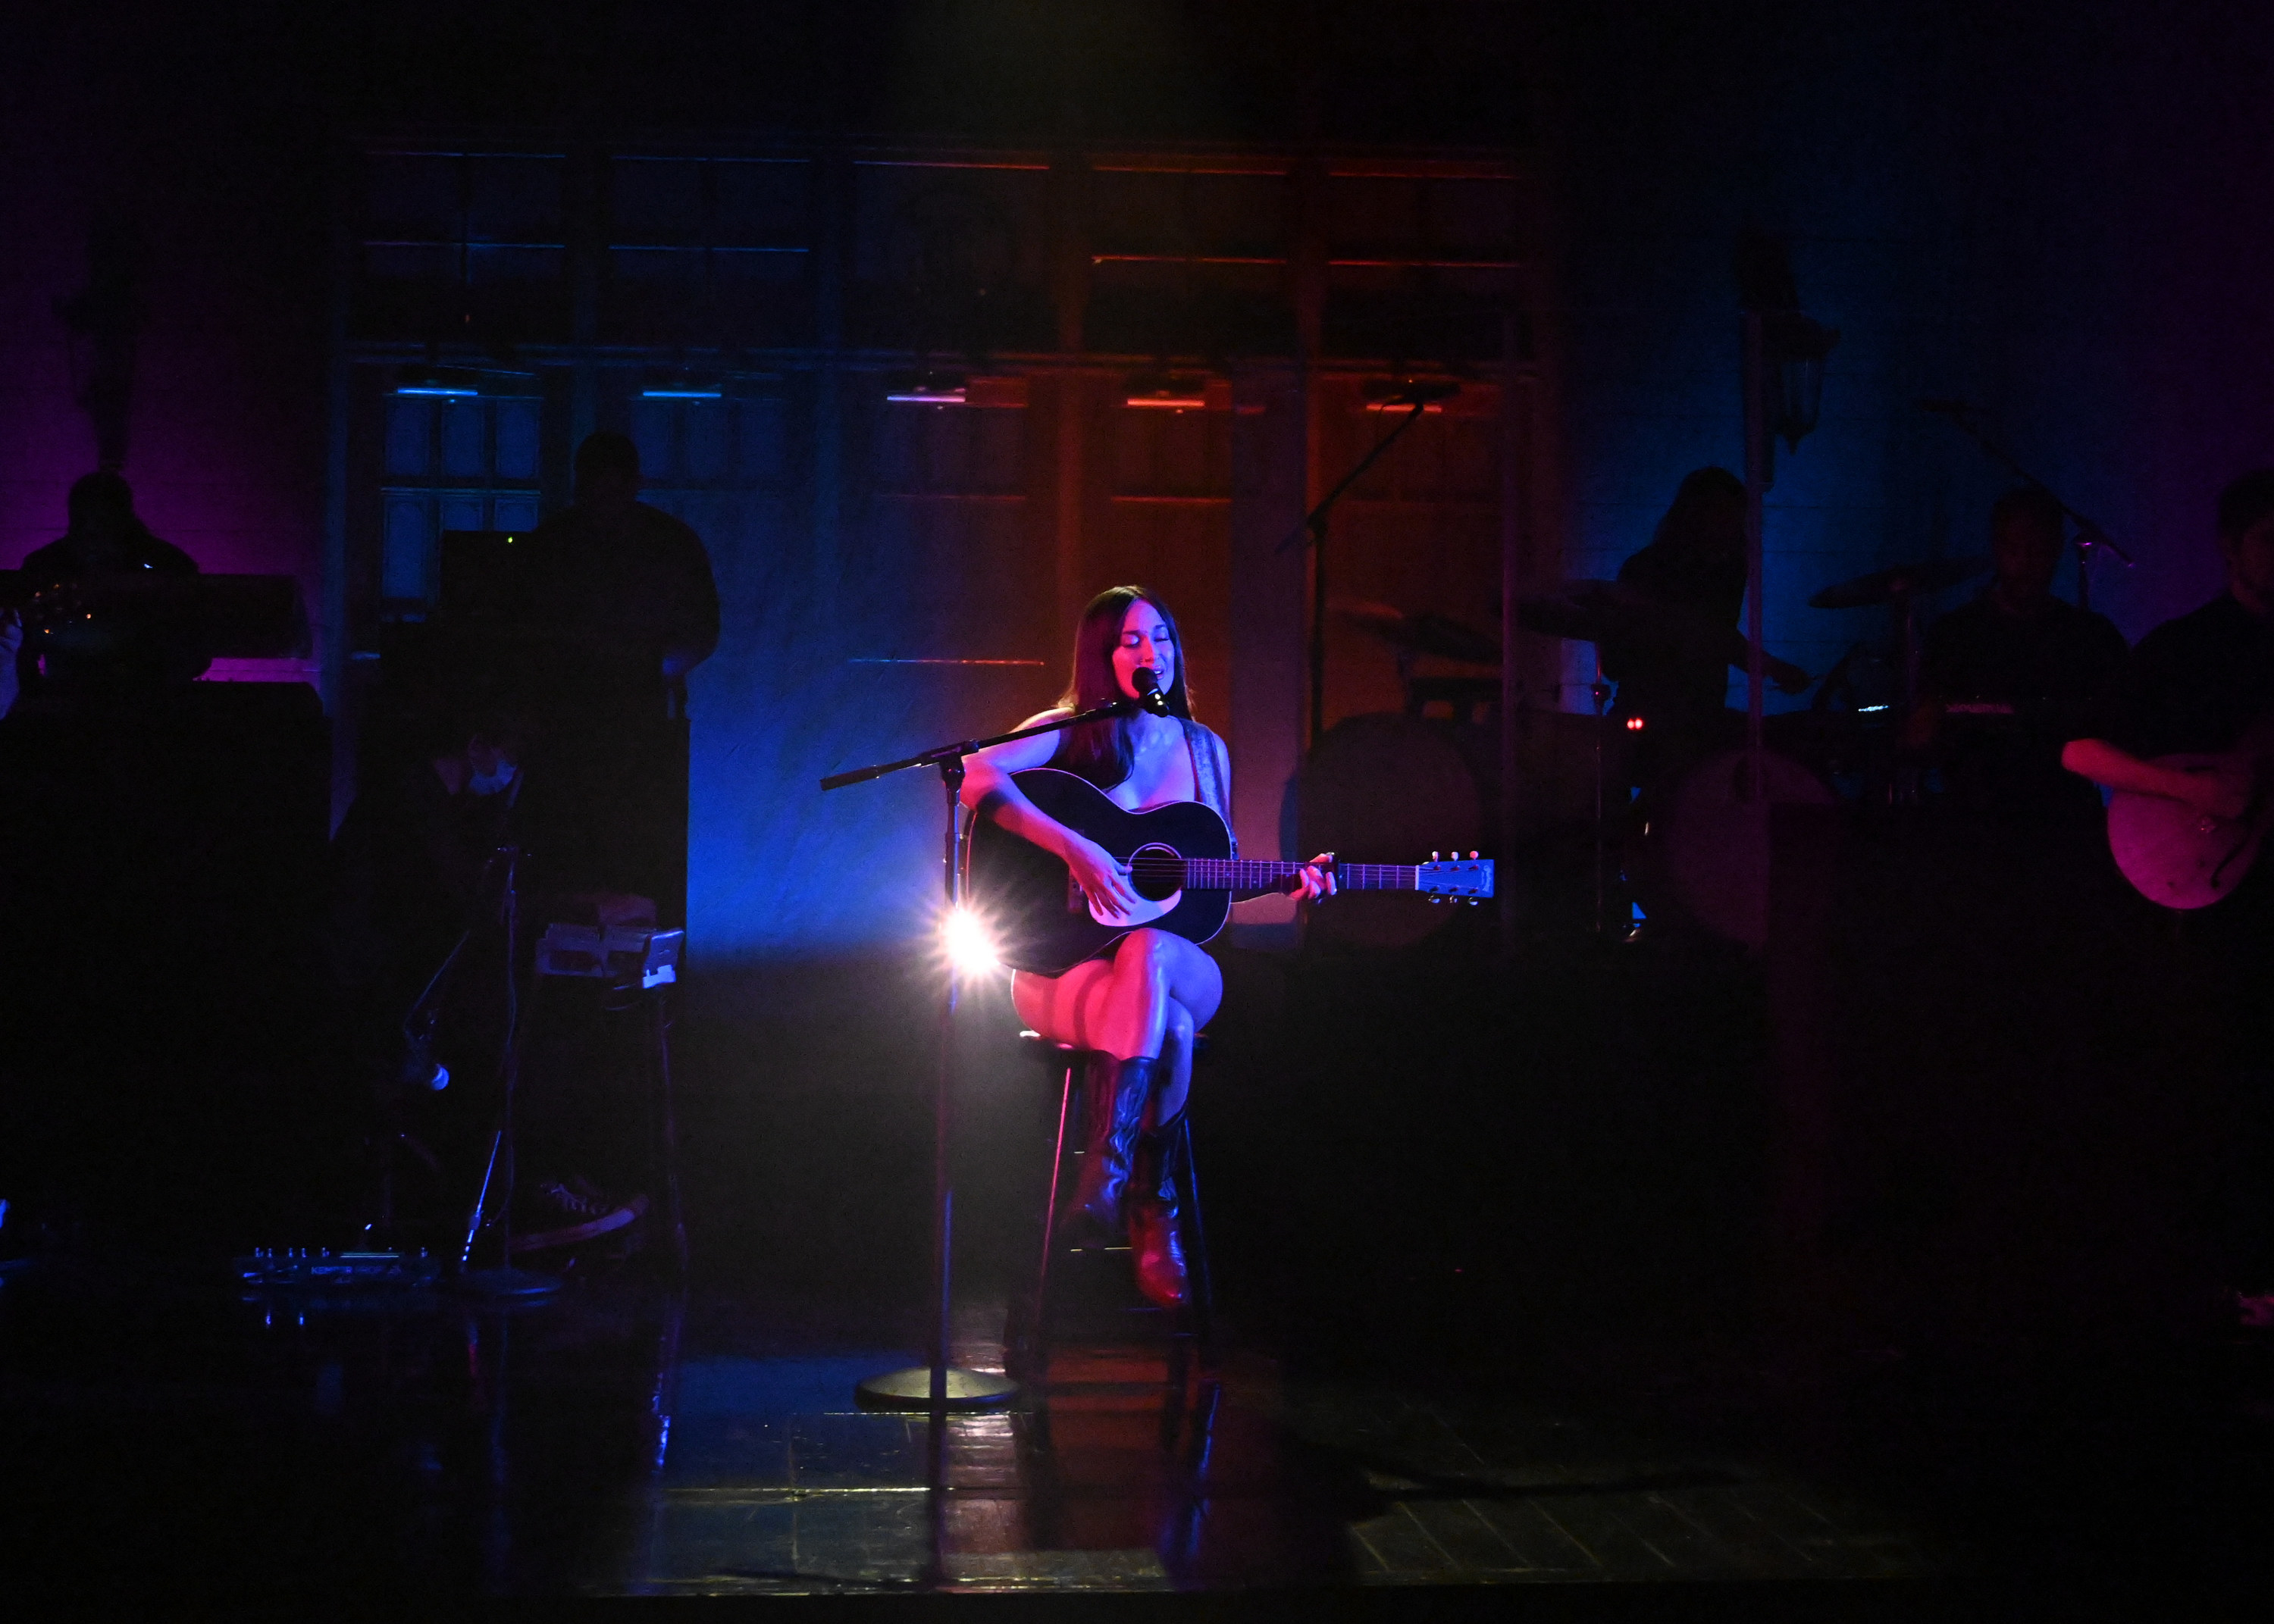 Kacey is naked while while sitting on a stool being covered up by a guitar